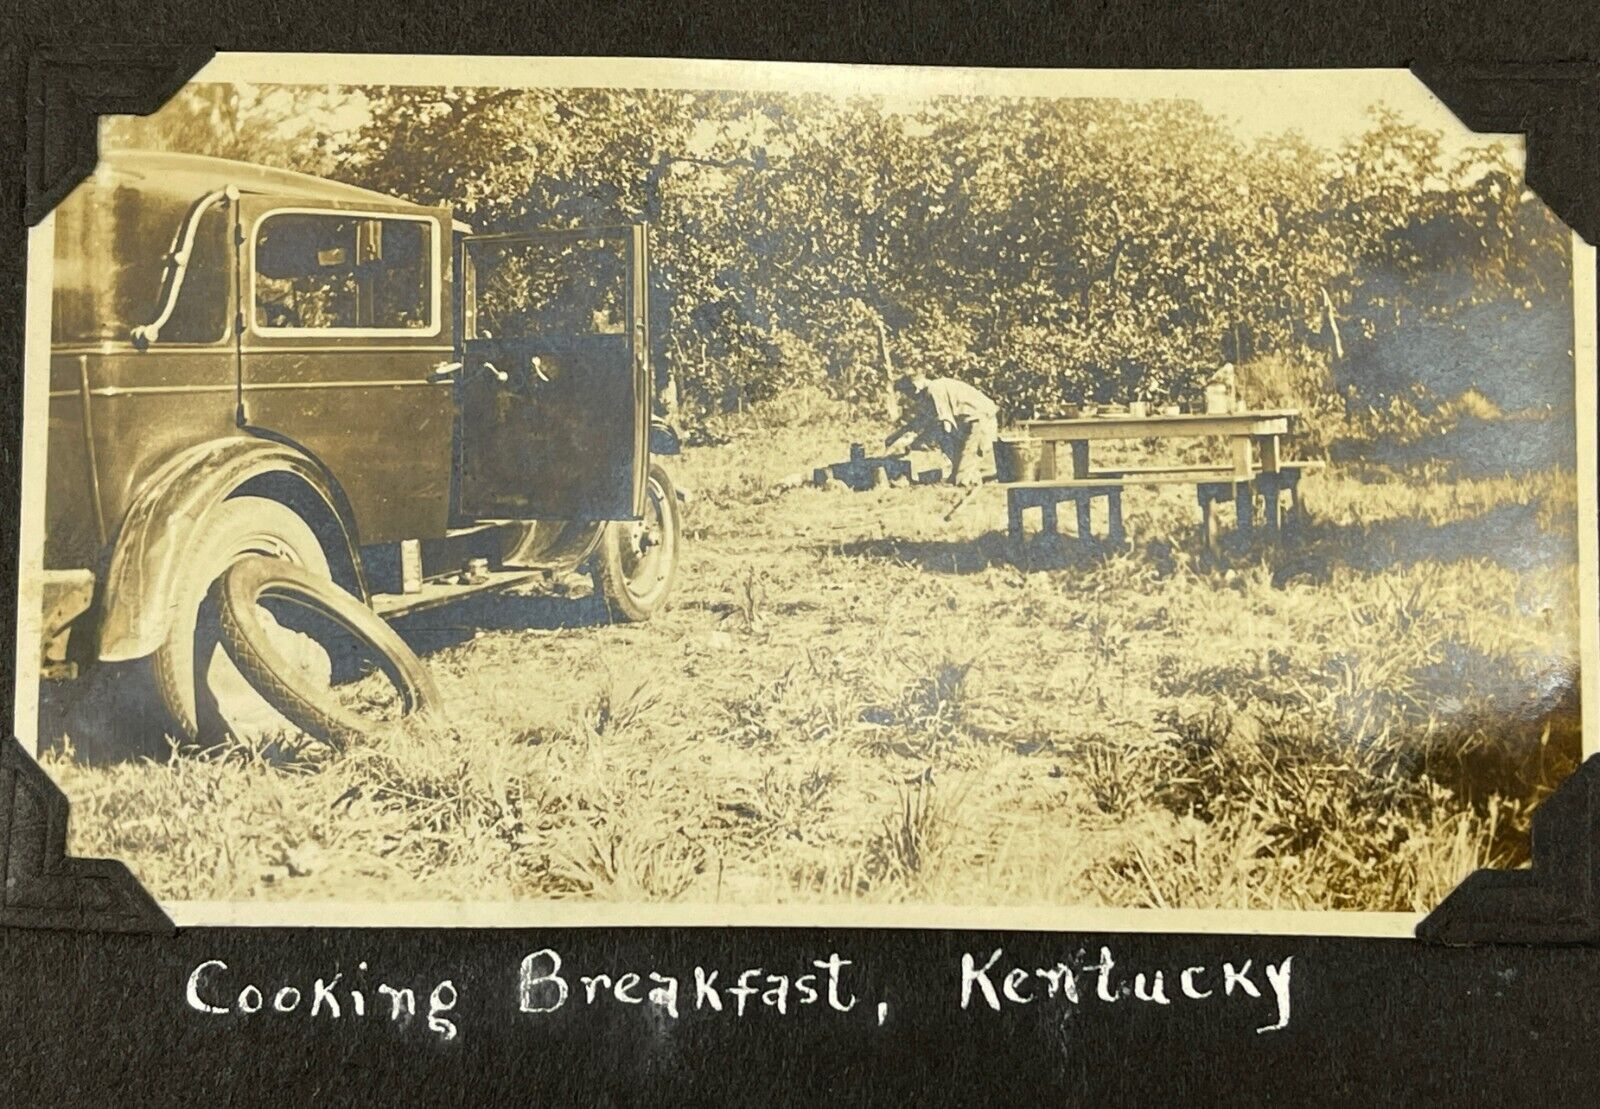 CAMPING IN KENUTCKY Old Classic Car 1930s Antique Photo Cooking Breakfast Camp